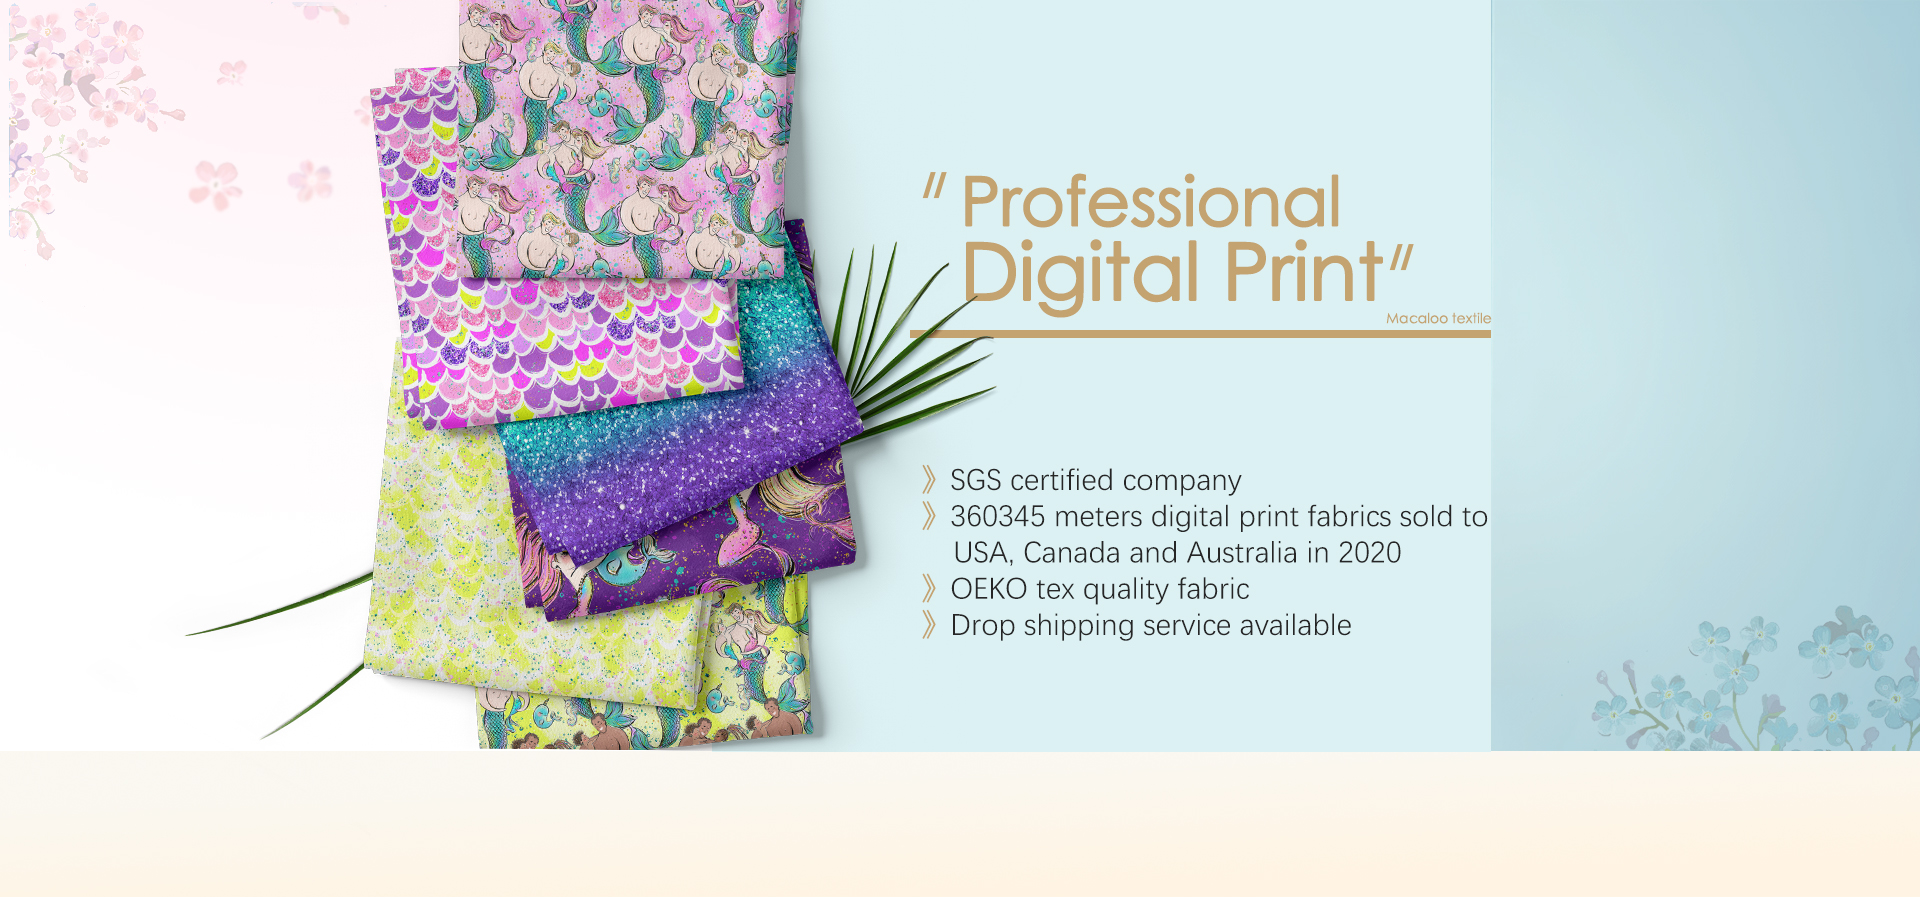 Macaloo specialized in custom digital printed fabric